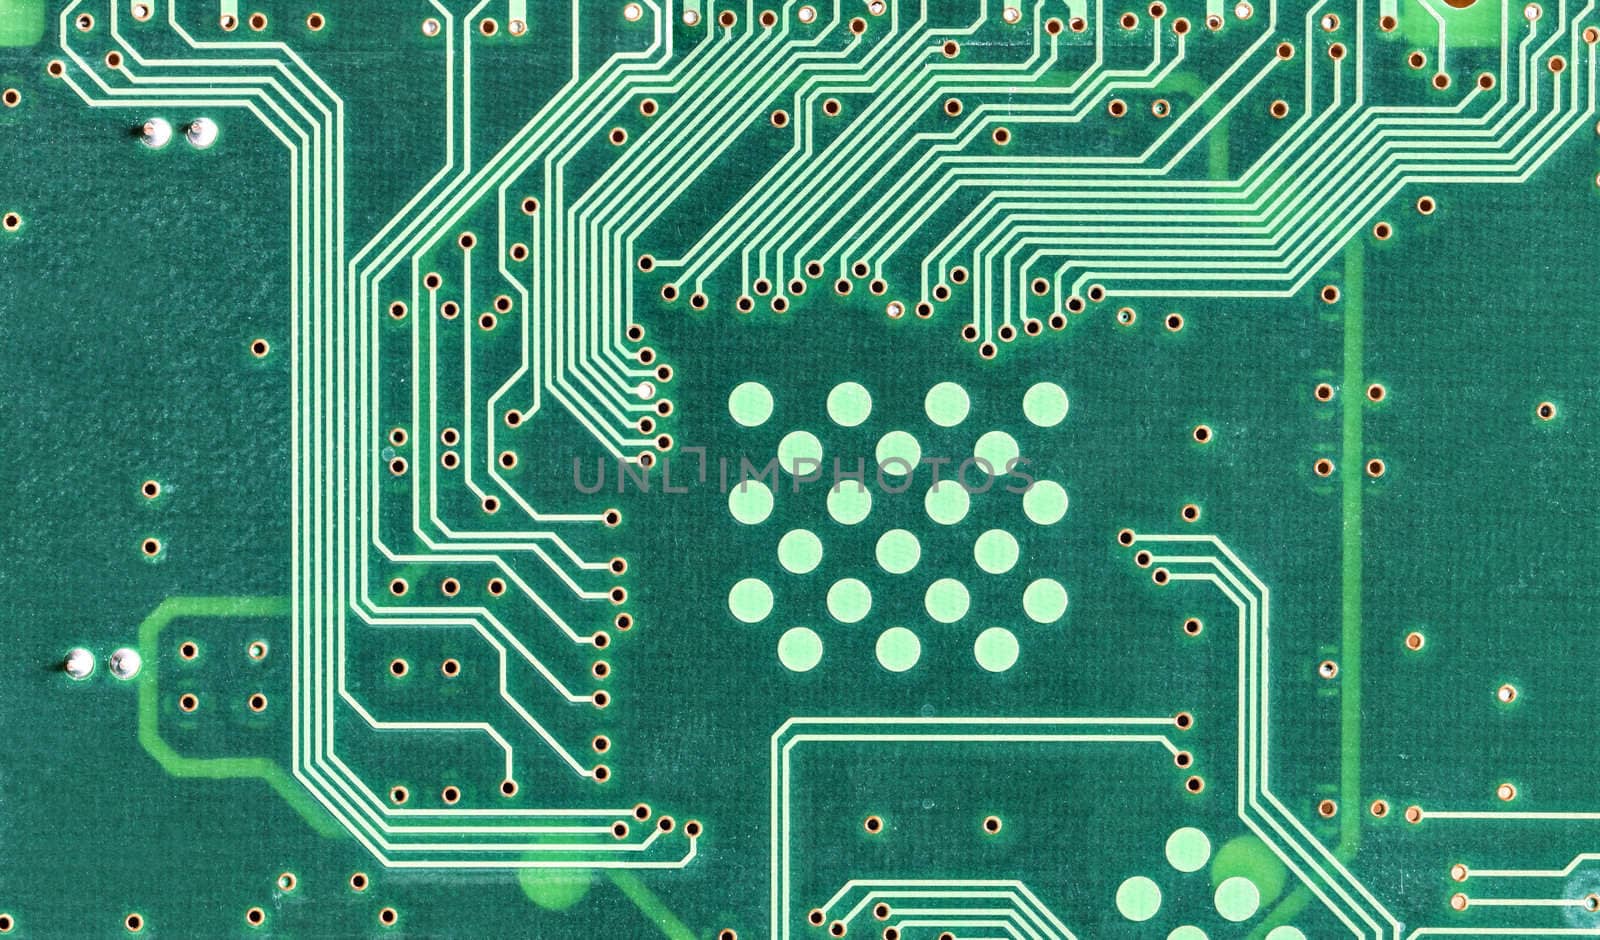 Green and golden electronic board for computer